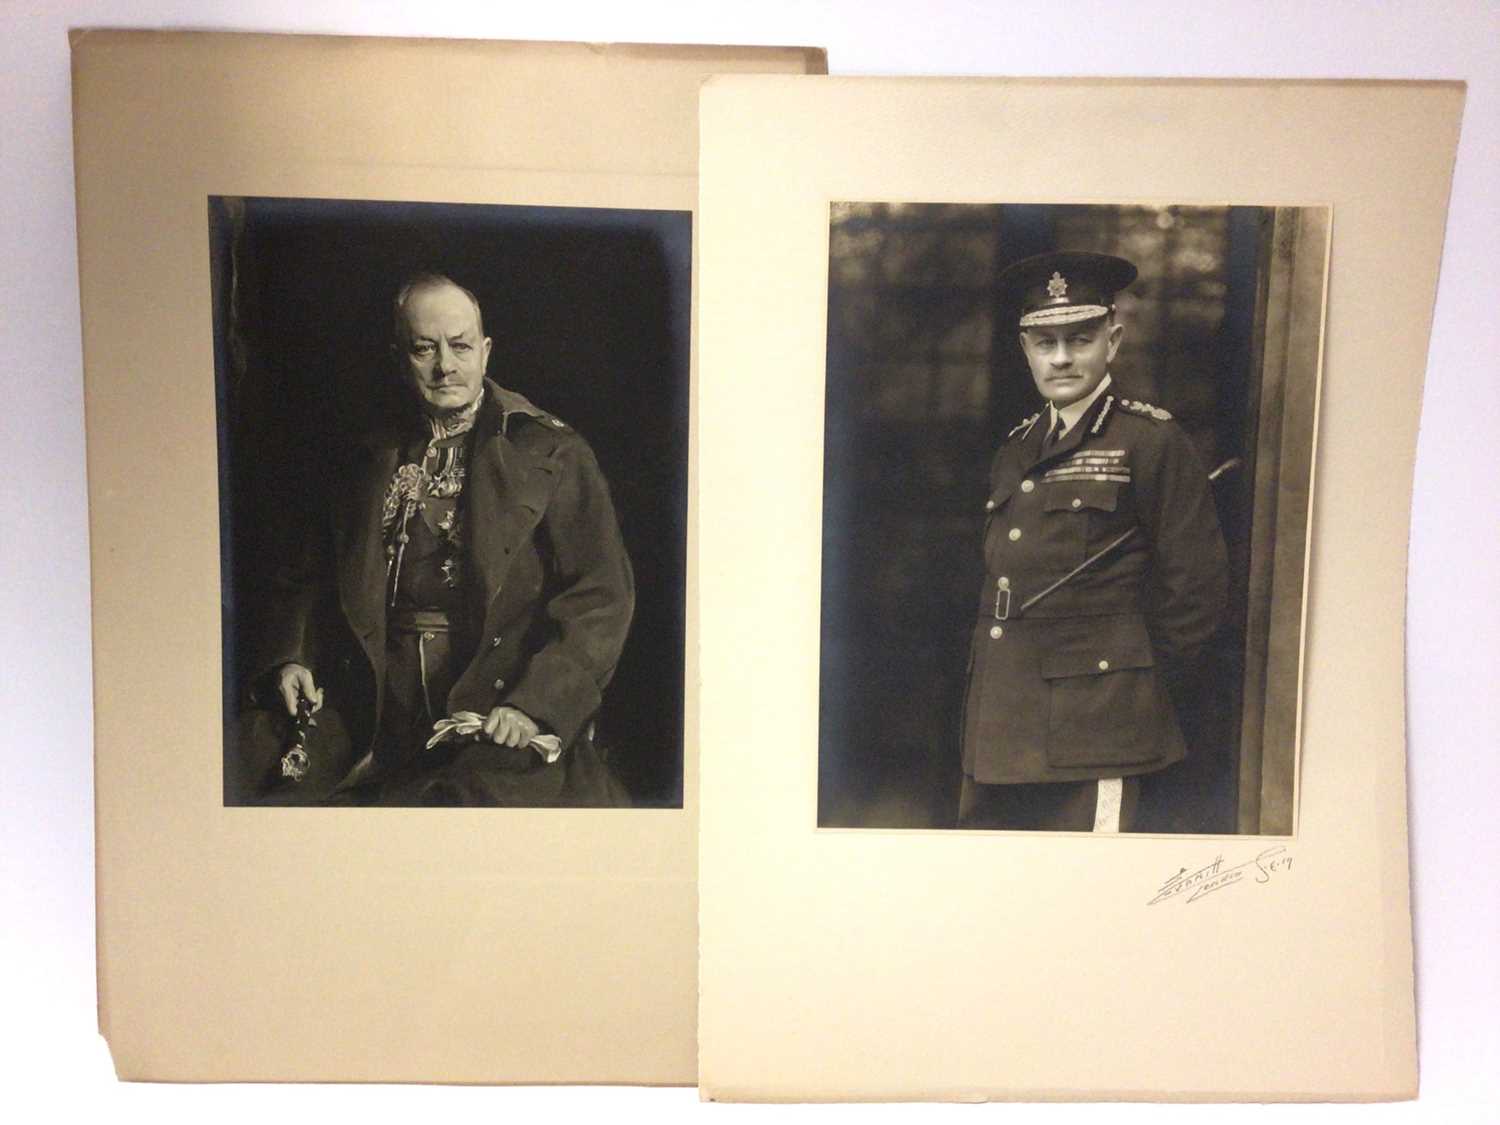 Lot 121 - Field Marshall Viscount Bing of Vimy, photograph of a portrait of the Field Marshall in uniform, another photograph of him in Police uniform, some of his headed writing paper and calling card.